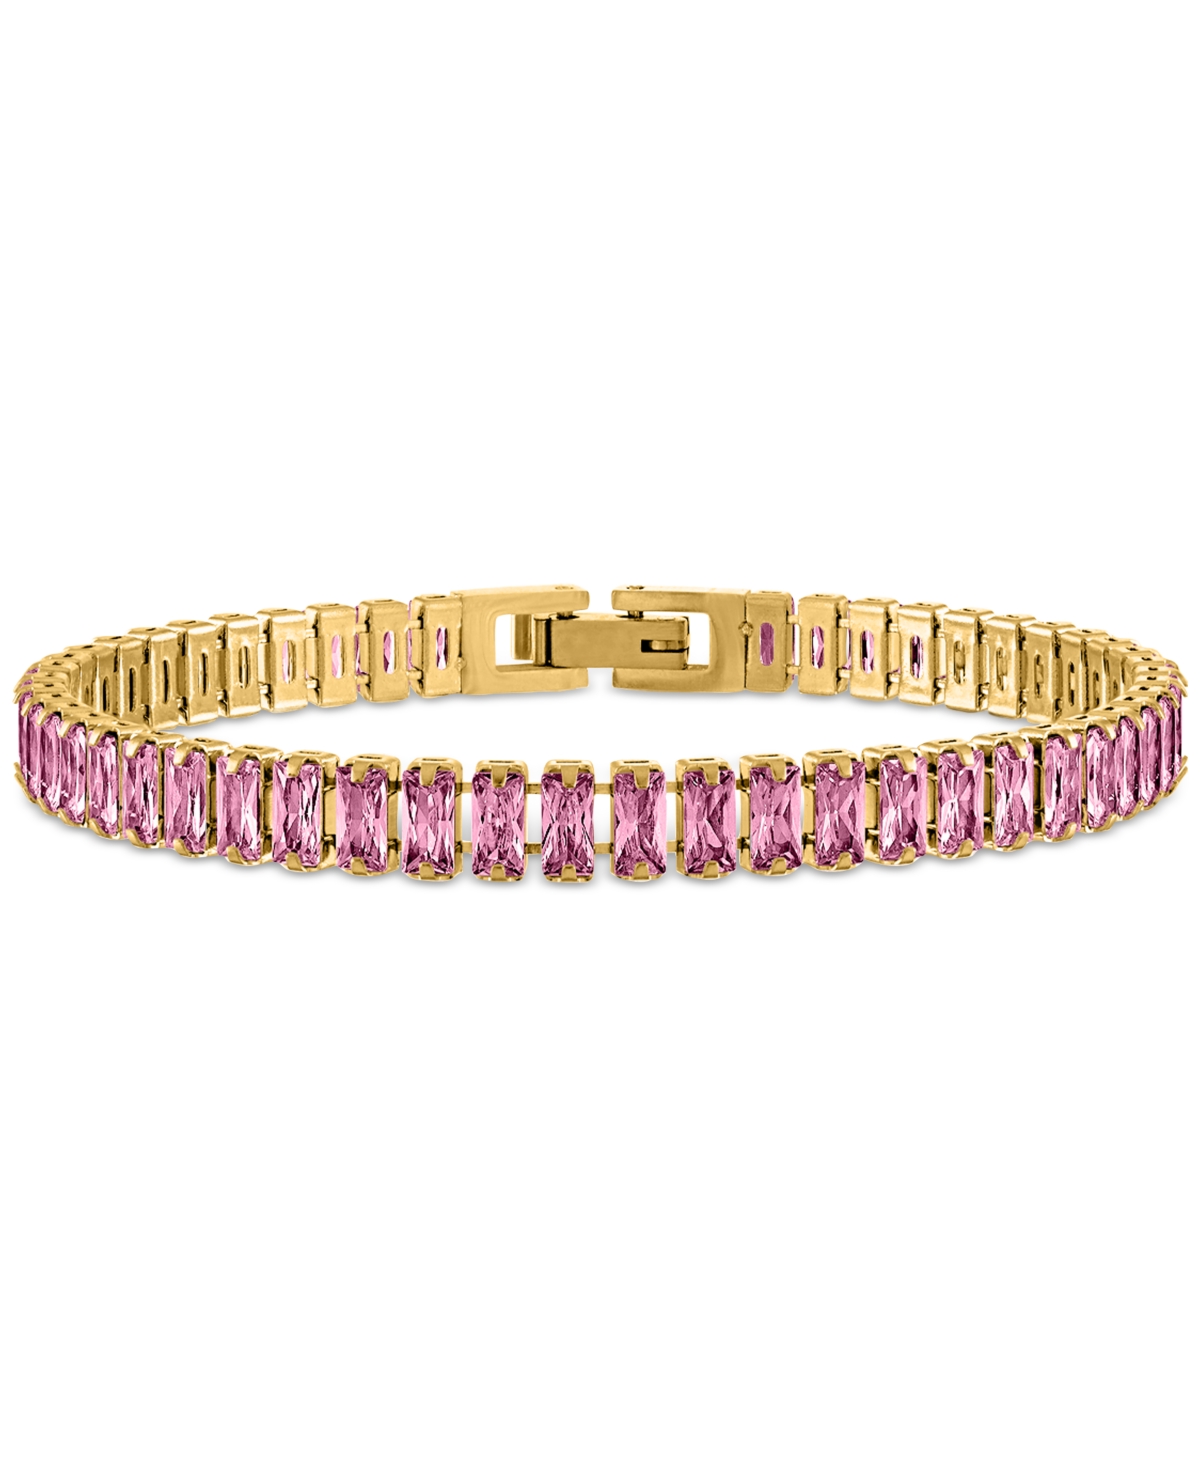 Oma The Label 18k Gold Plated Baguette Cubic Zirconia Flex Bracelet In Pink Stone